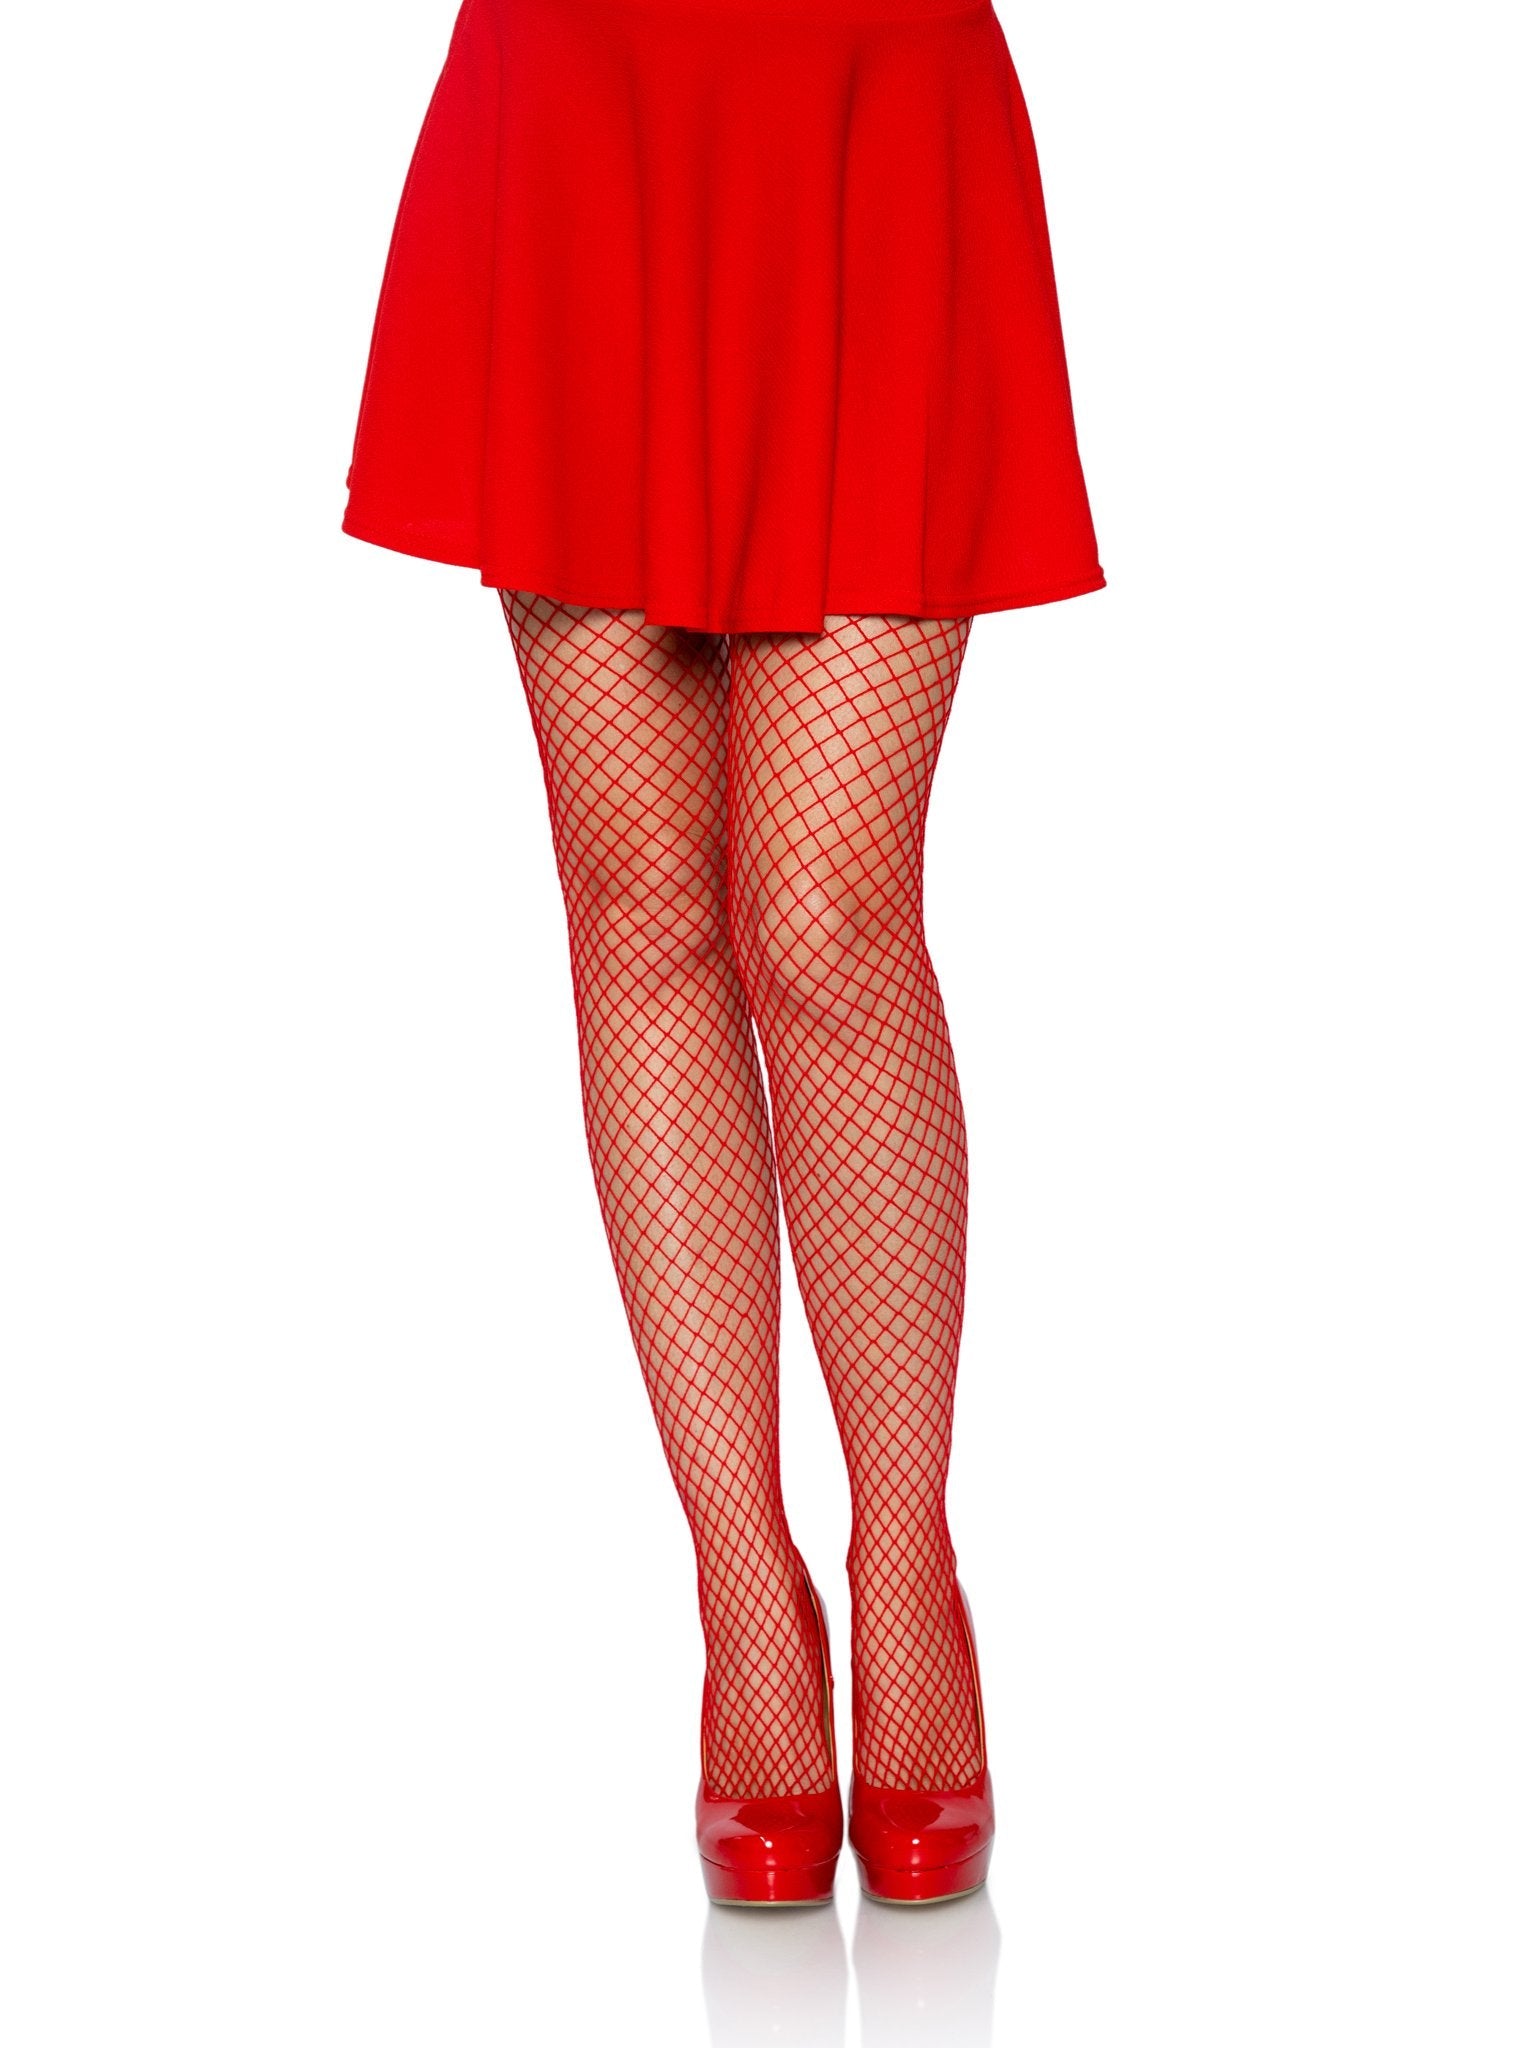 Spandex Industrial Net Pantyhose in red on model, front view.